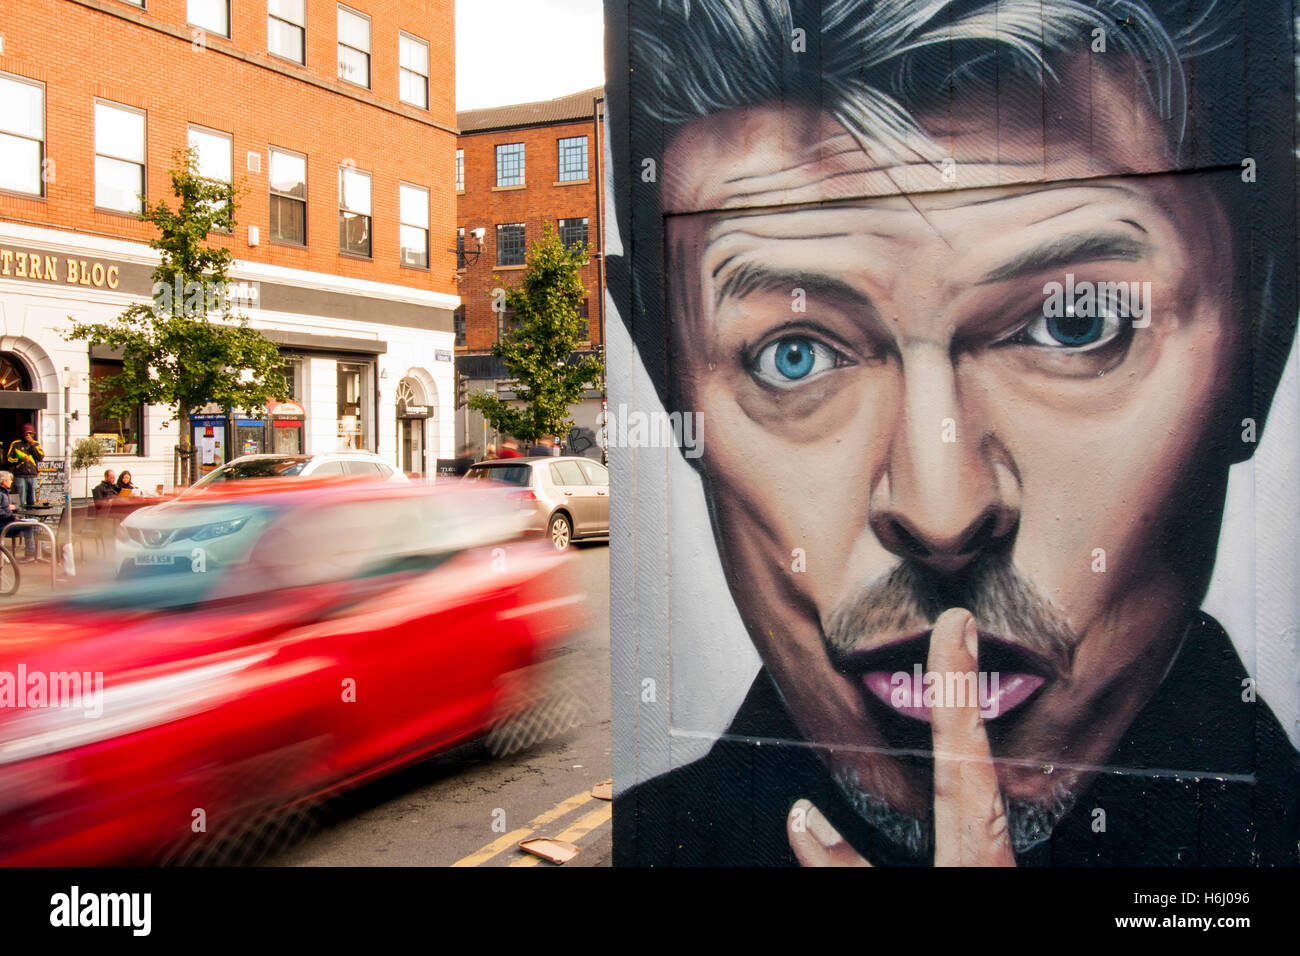 David Bowie Tribute Mural Northern Quarter Manchester Stock Photo